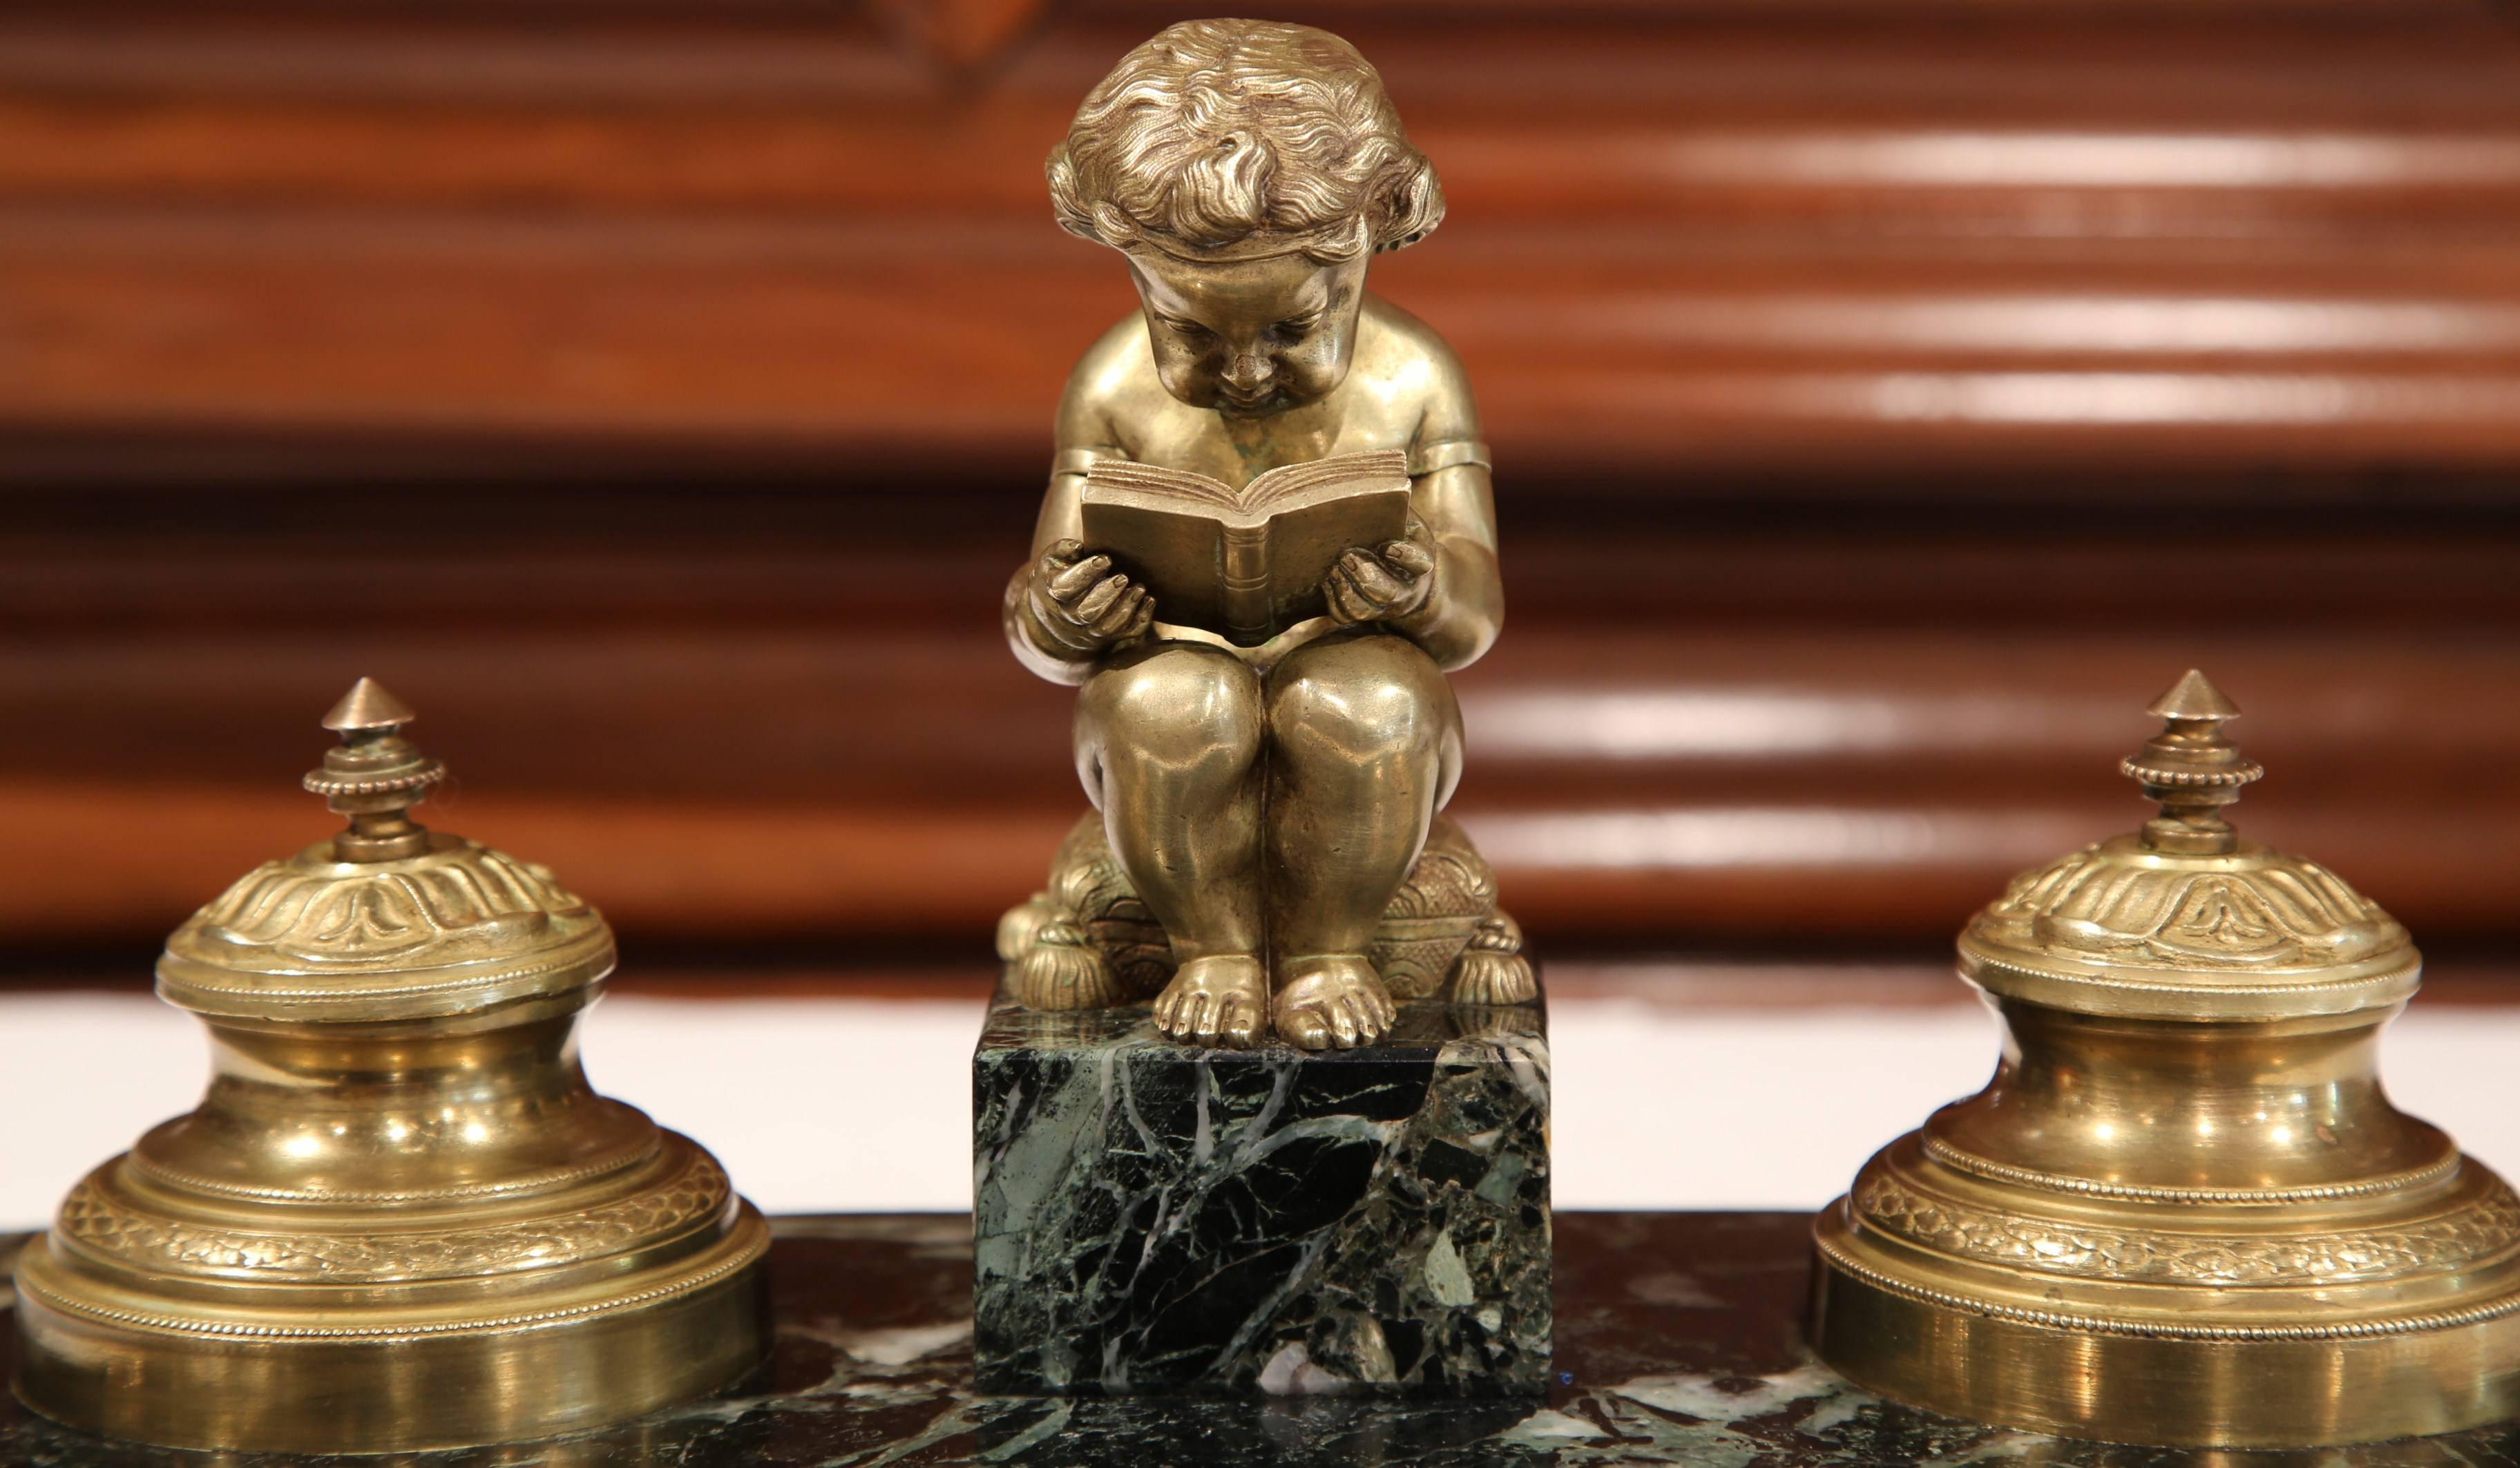 Embellish your desk with antique flair with this fine inkwell from France. Crafted, circa 1870, the symmetrical inkwell features a bronze young boy sitting on a cushion while reading a book. On either side of the cherub, are two bronze inkwells with